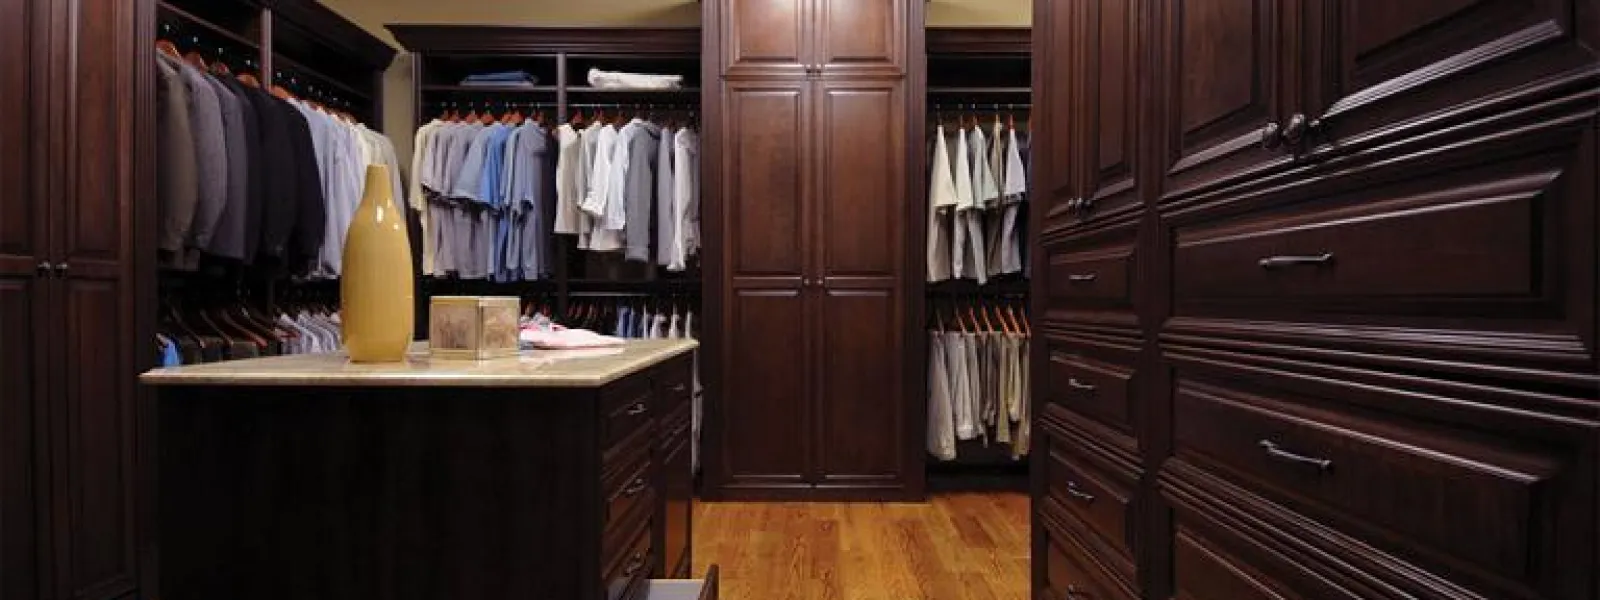 Folding Clothes in Your Custom Closet Like the Pros